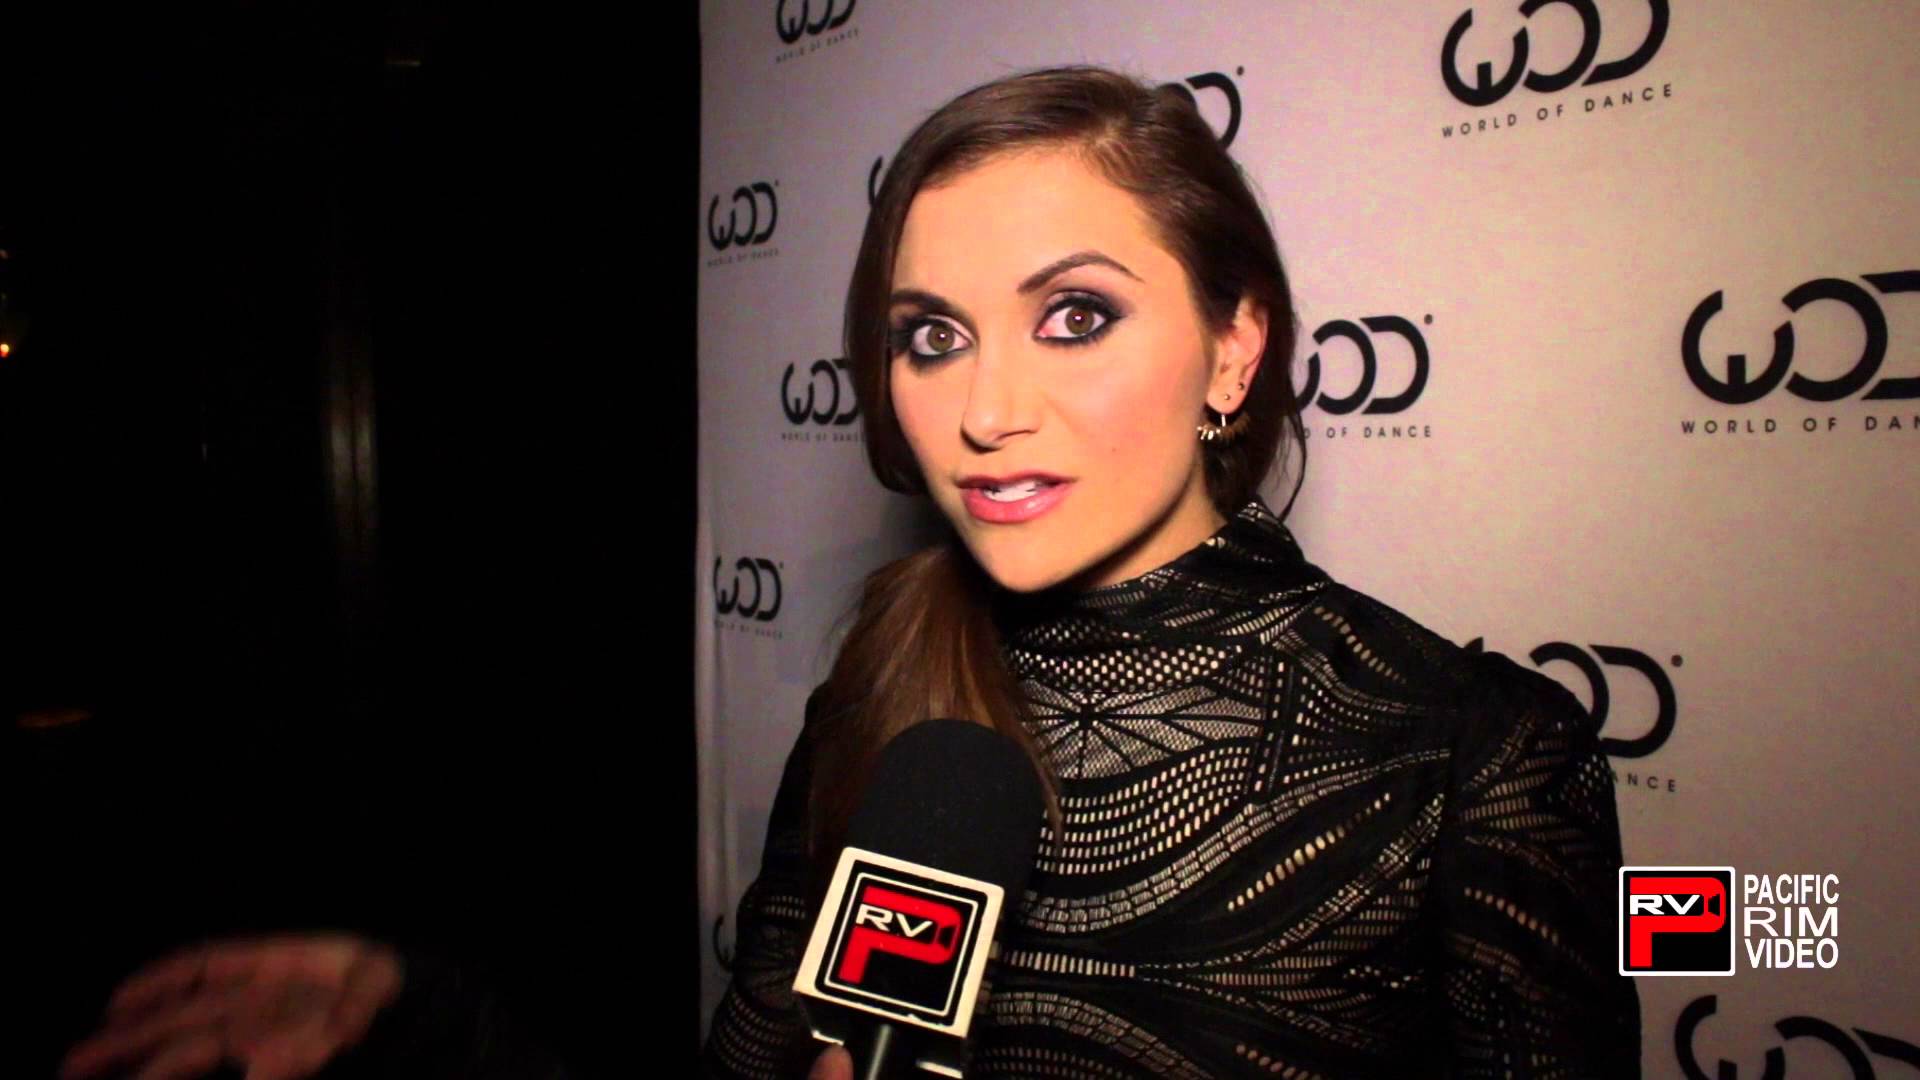 Alyson stoner excited for WOD Awards plus new music and video coming up